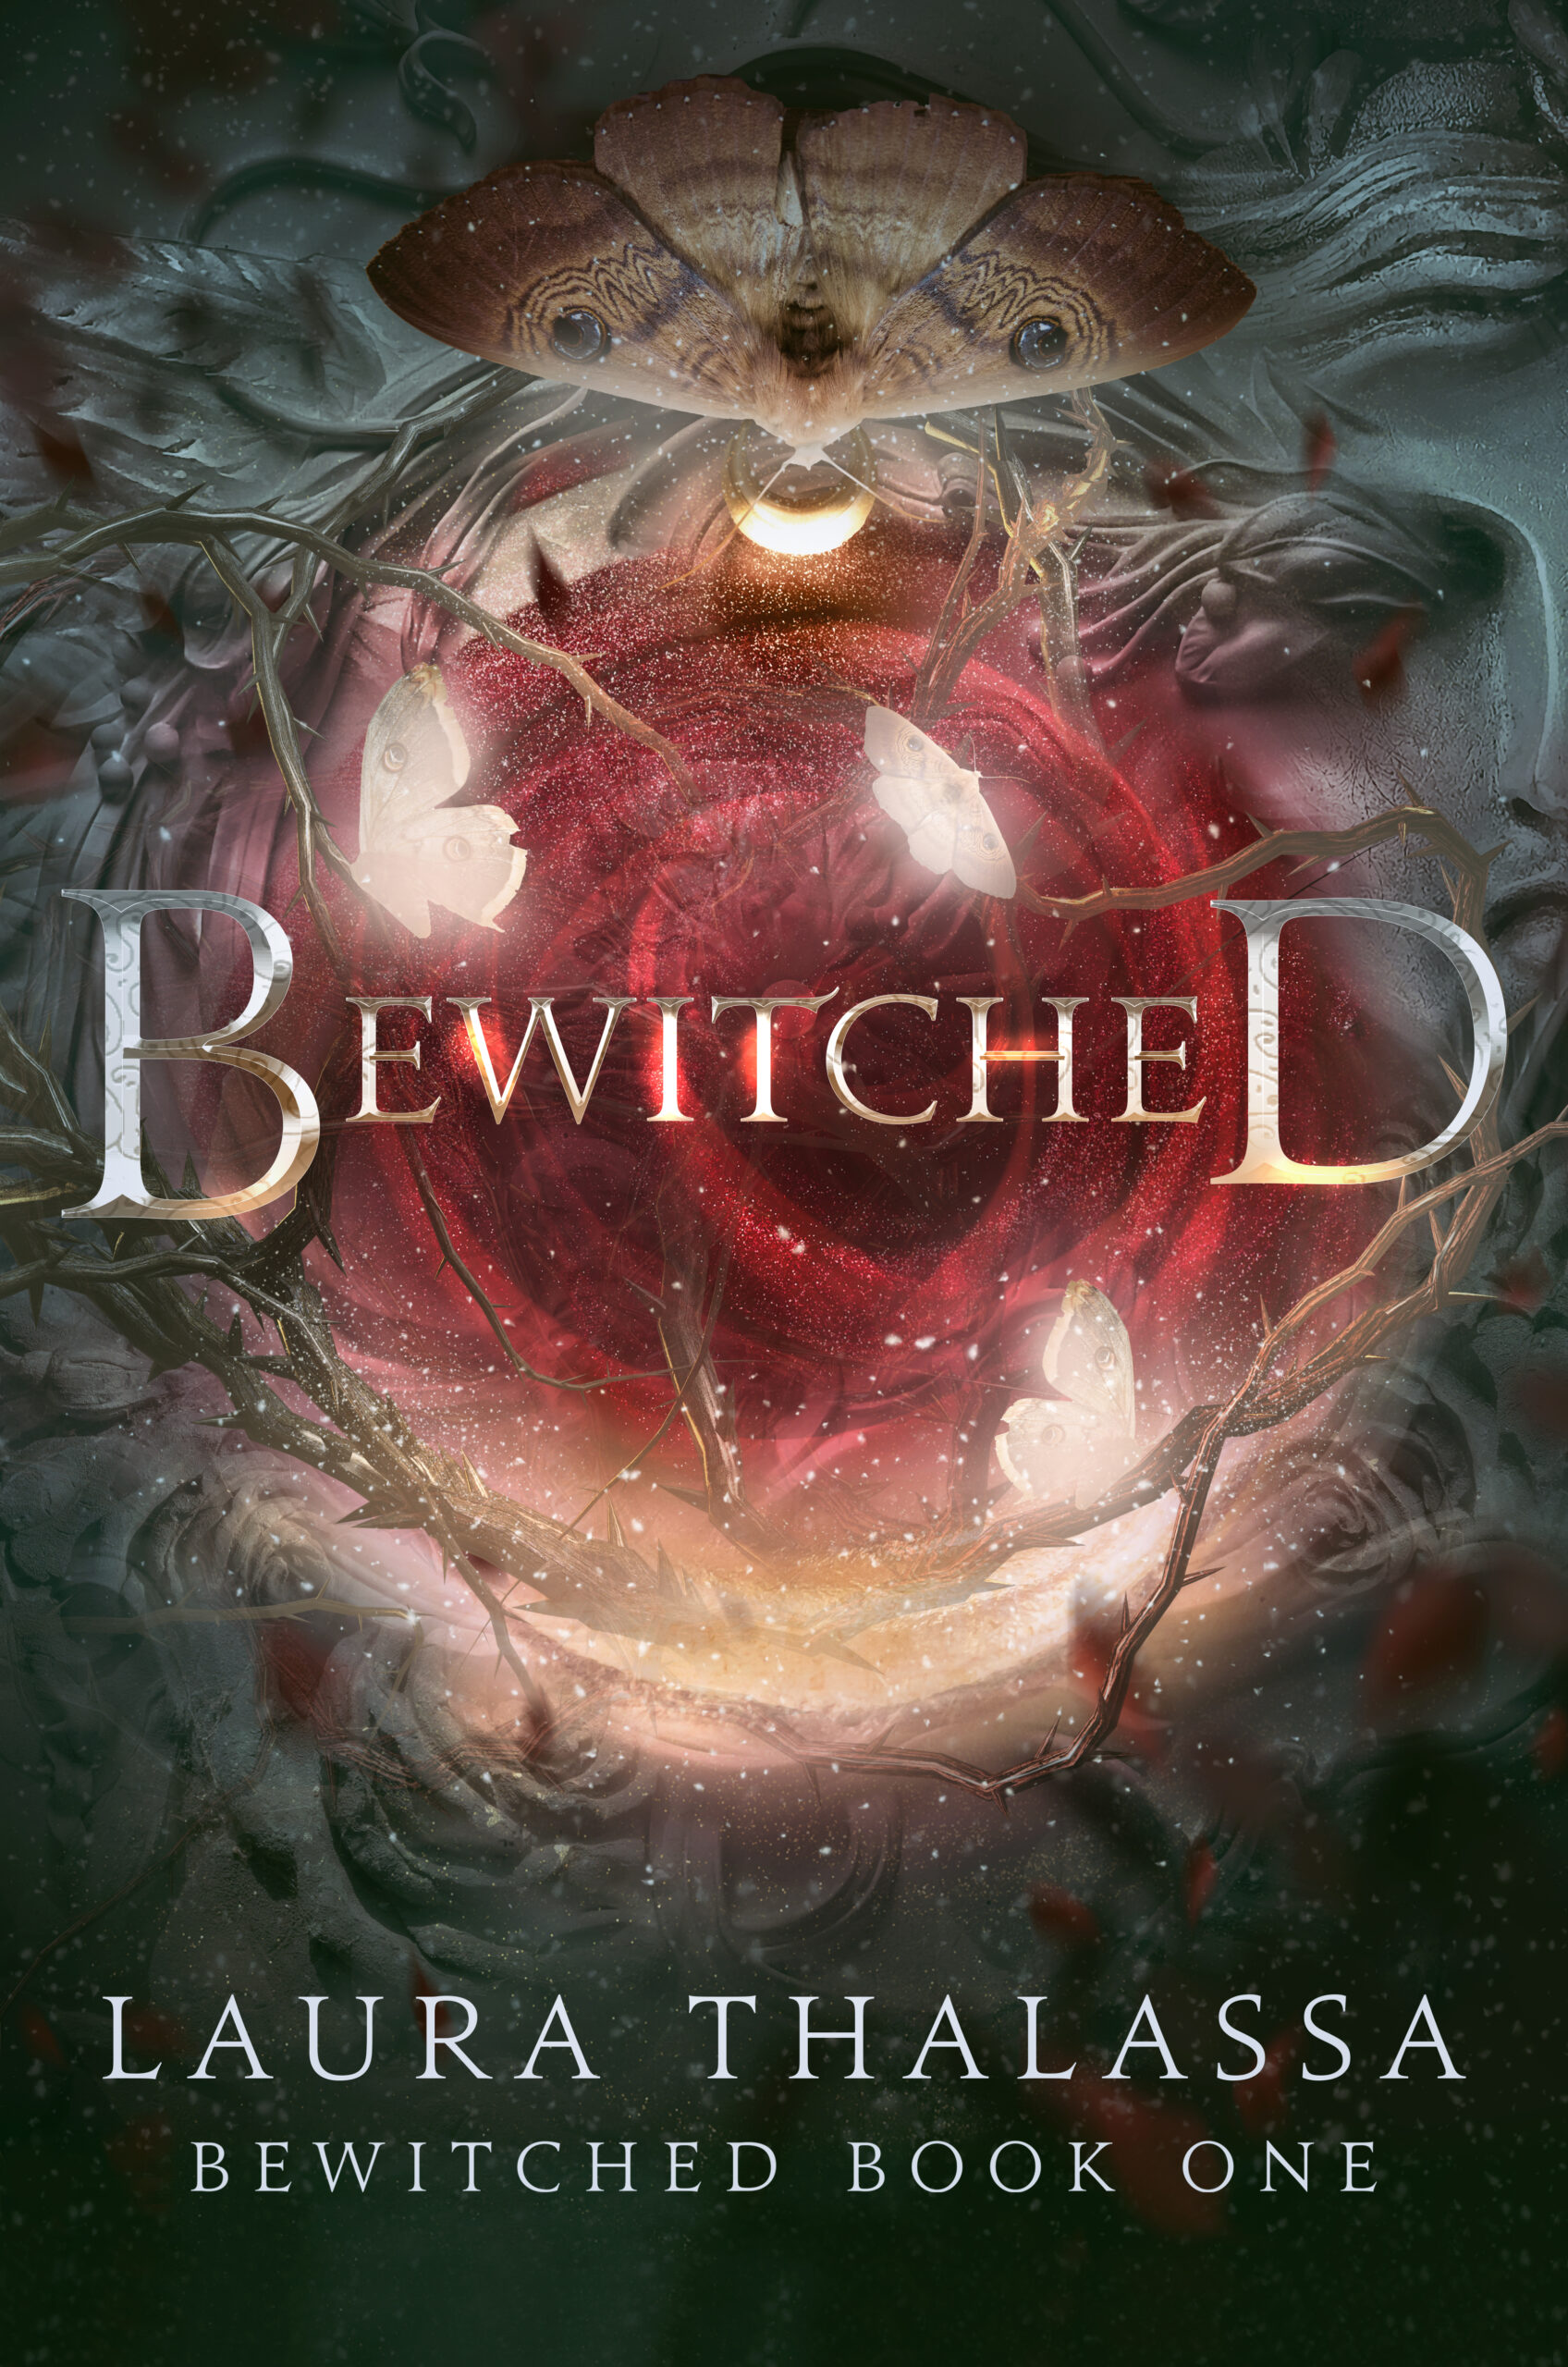 BEWITCHED (Bewitched #1) Cover – Laura Thalassa